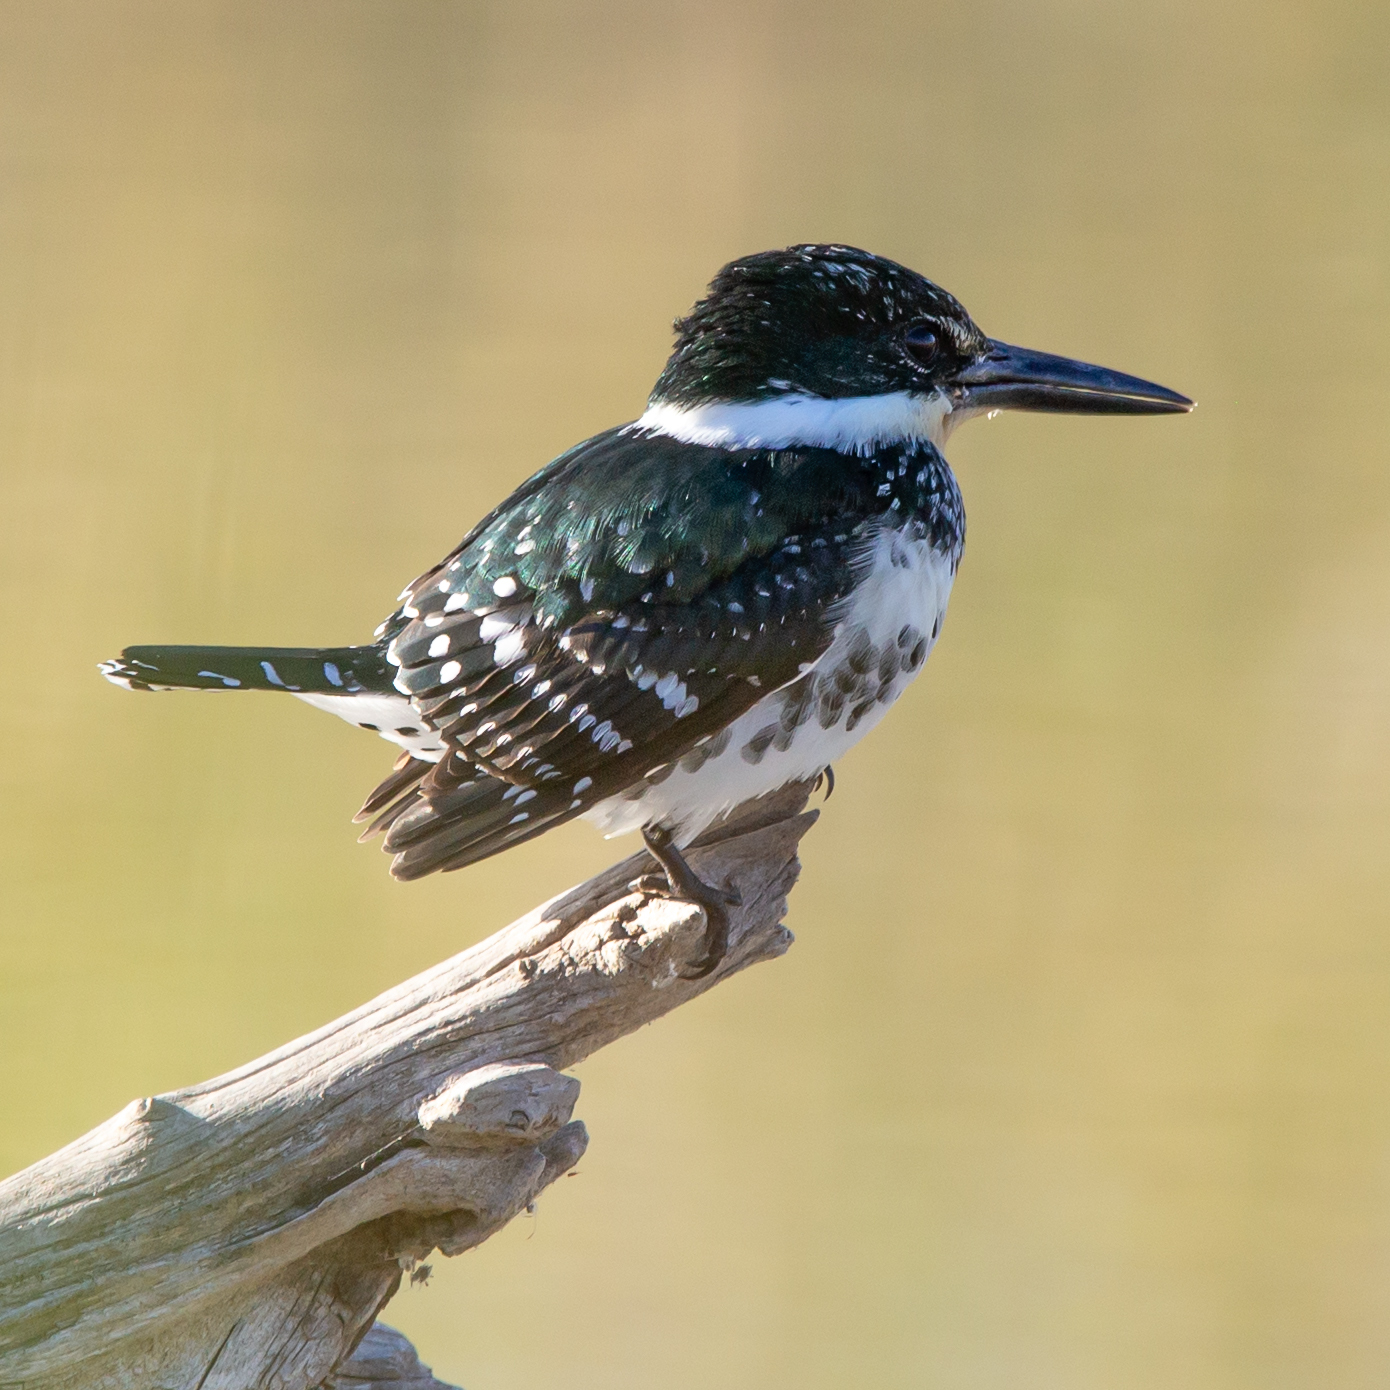 A green kingfisher in clear focus perches on a stick of dead wood. The bird has a large, dark, thick bill; dark emerald green feathers on its head and back; a white hand around its neck, white and gray chest, and white speckles on its wings. The bird is in profile, and perched as though it is waiting for its next prey to come along.